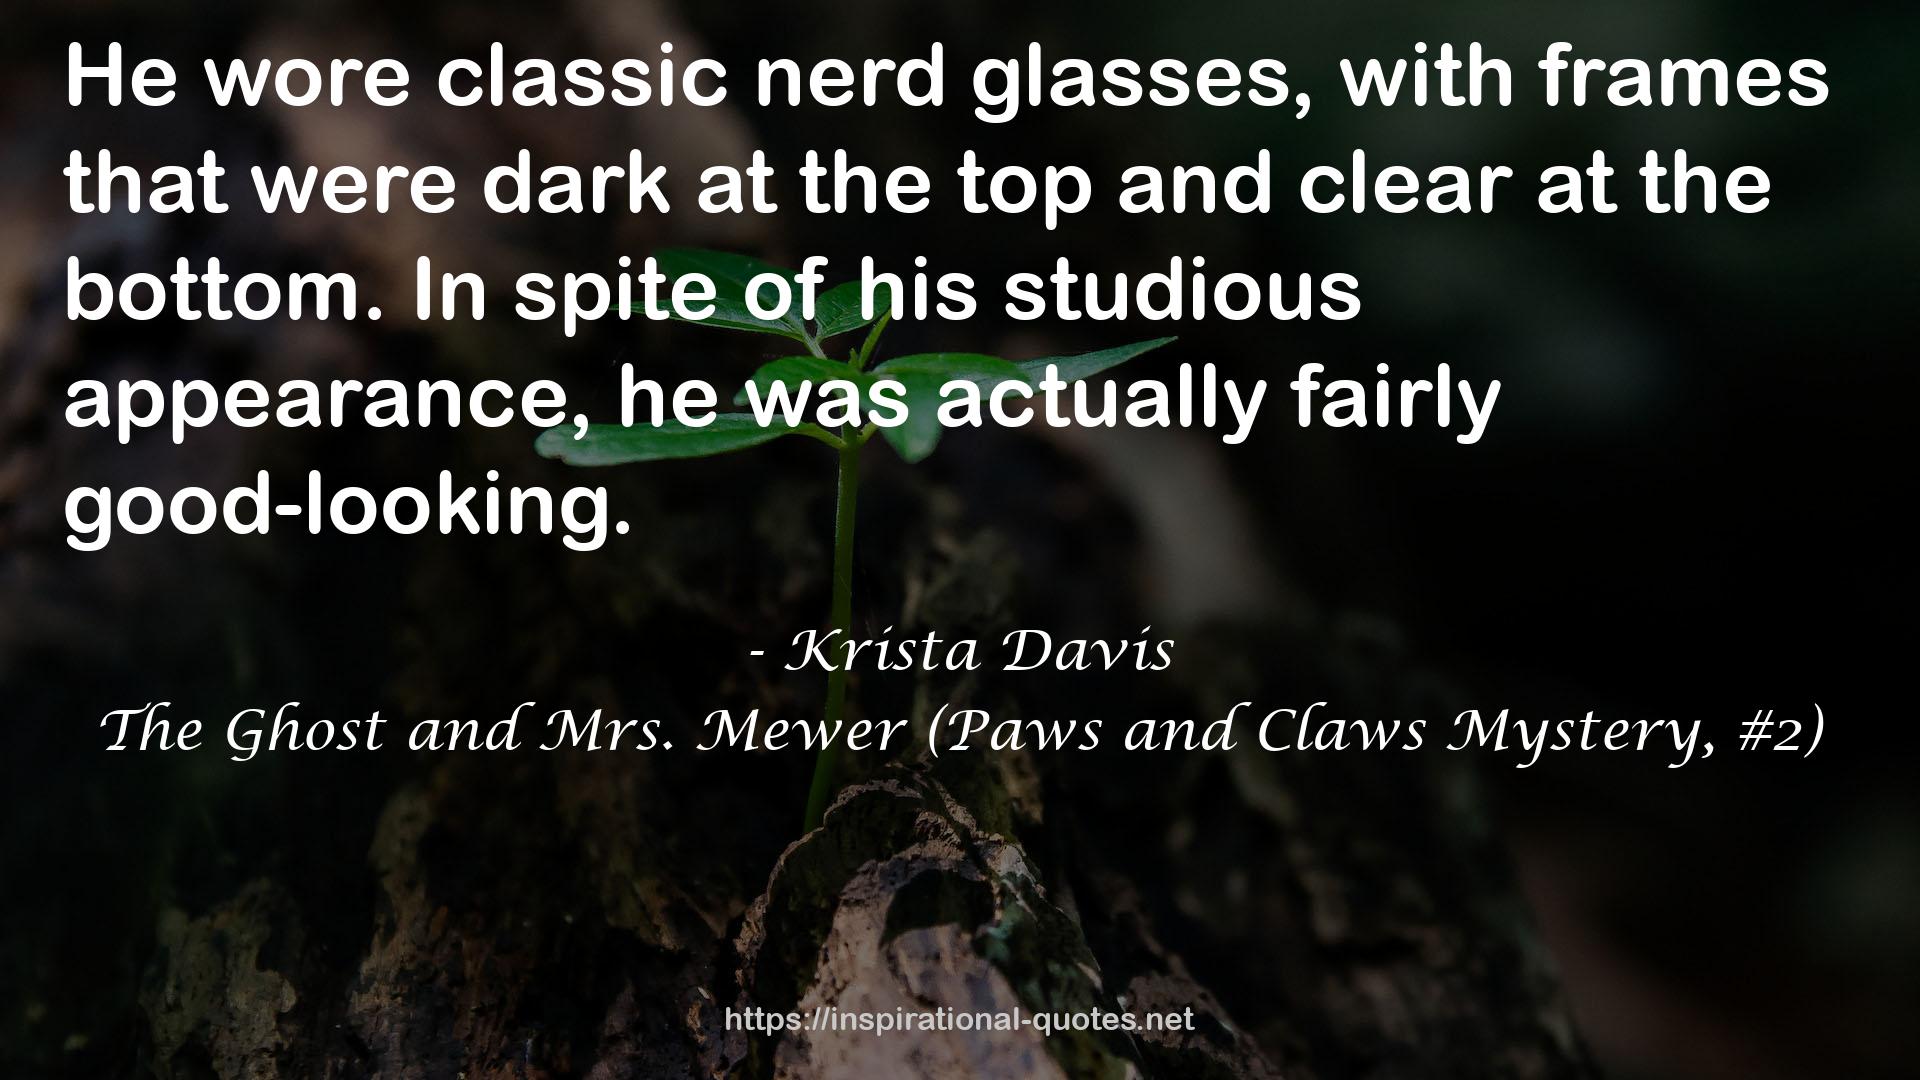 The Ghost and Mrs. Mewer (Paws and Claws Mystery, #2) QUOTES